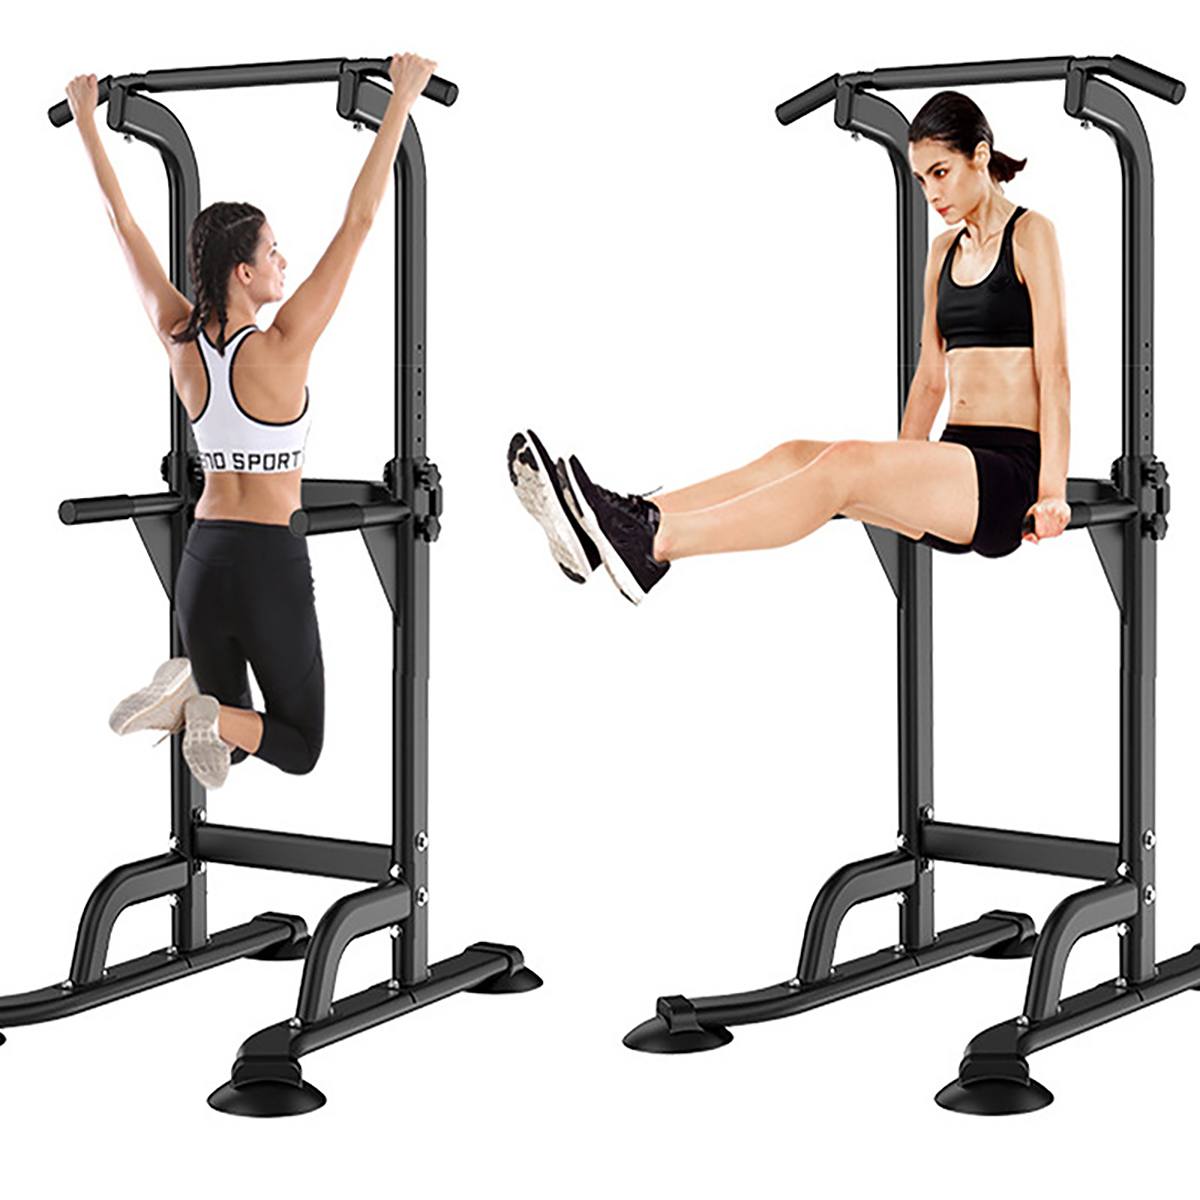 Indoor Pull Up Bar Adjustable Horizontal Bars Multifunction Workout Pull Up Station Power Tower Home Gym Fitness Equipment 150kg